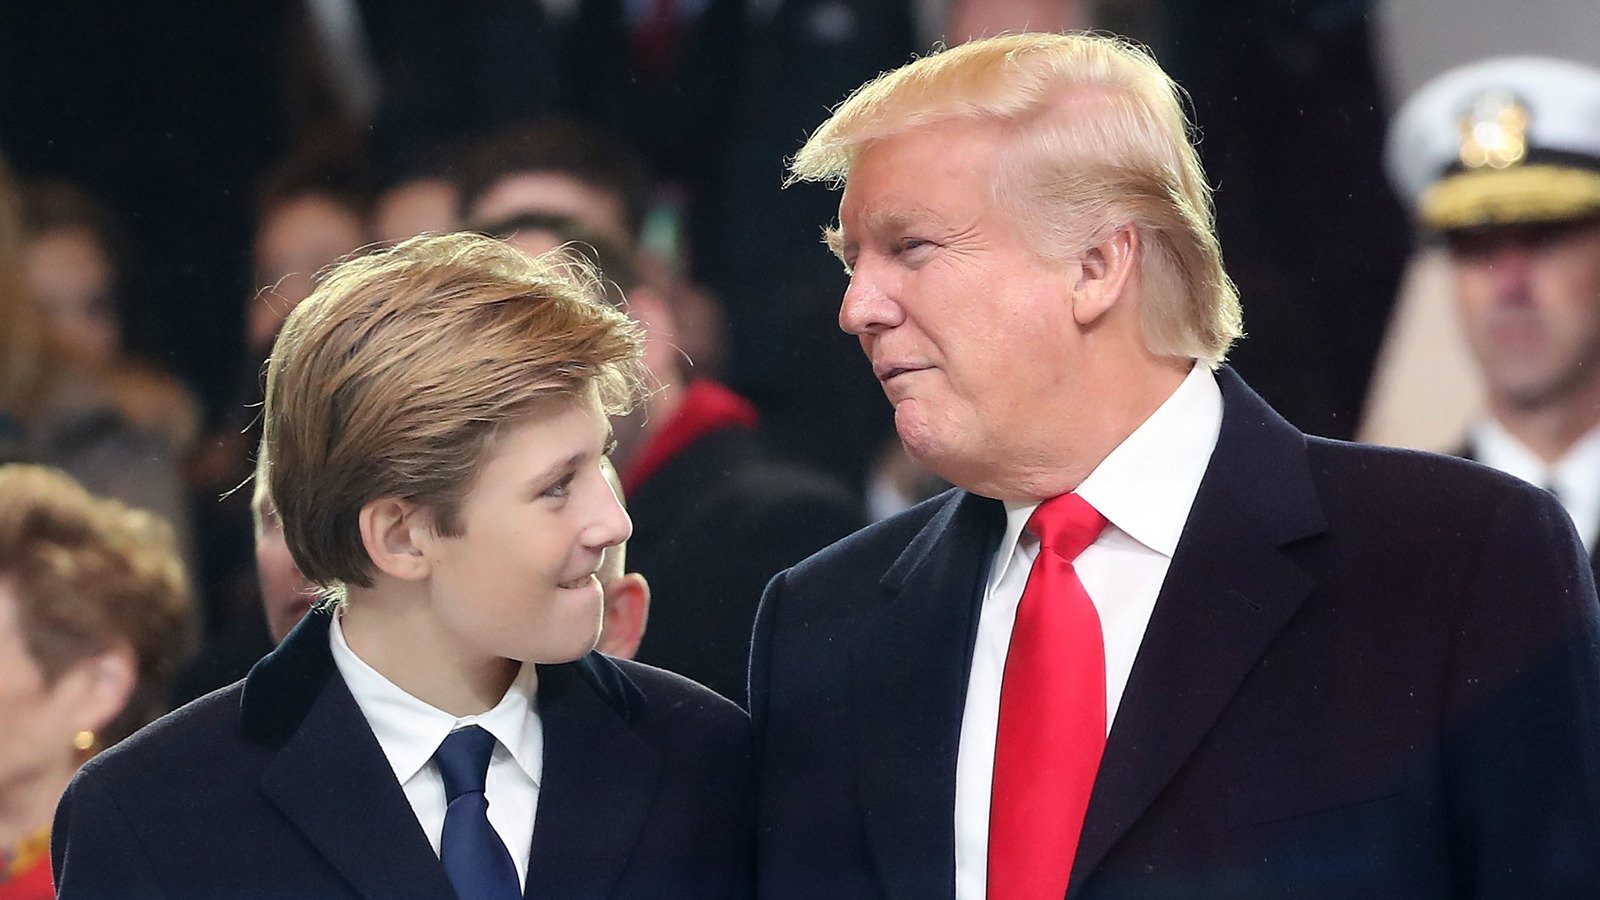 The Truth About Barron Trump Missing Out On Major Events During His Dad's Presidency